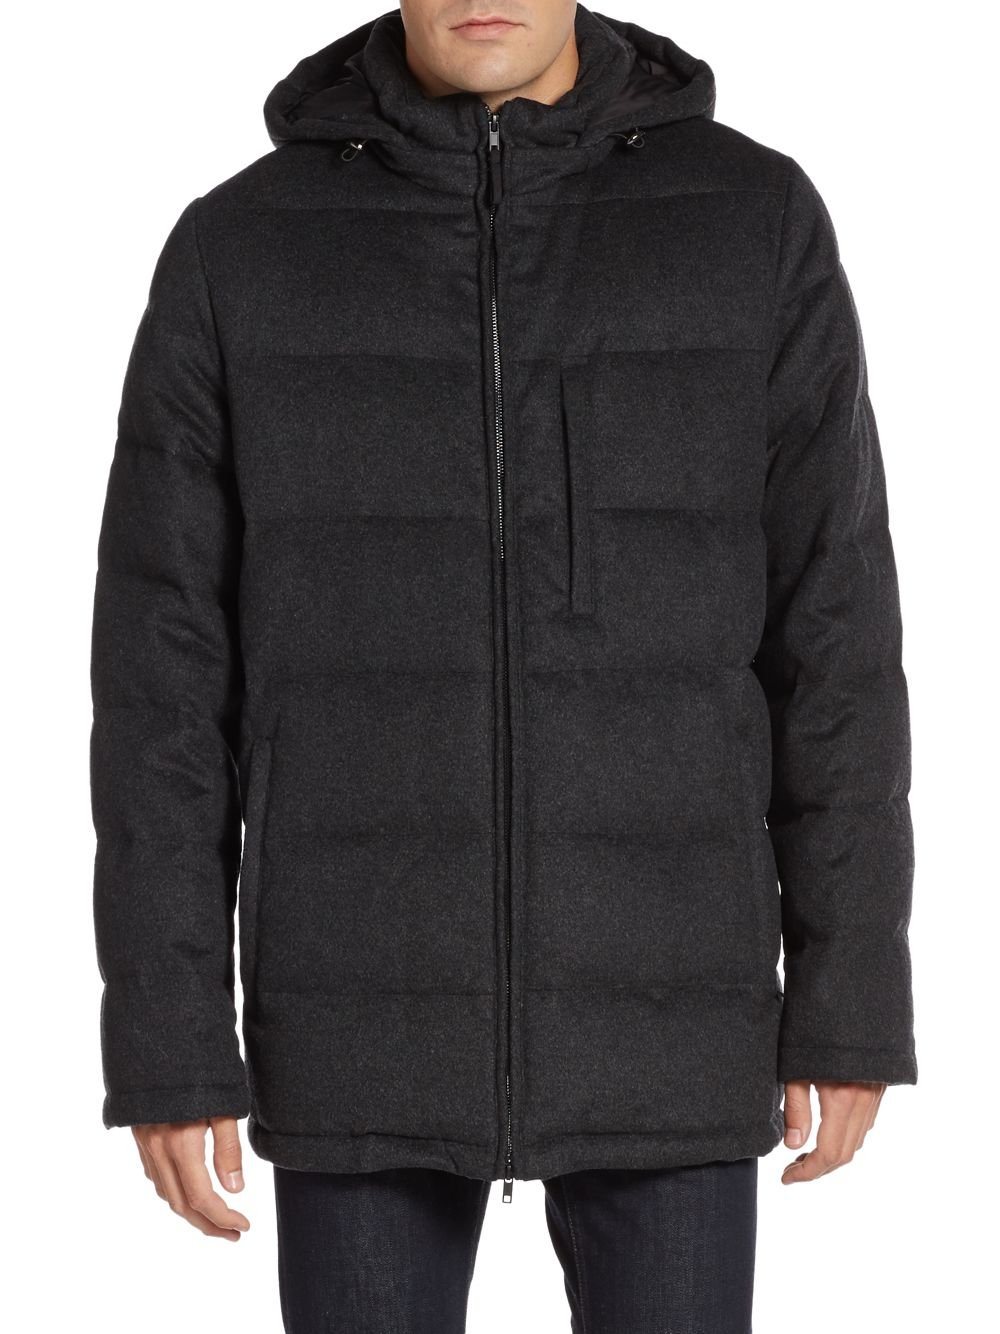 Lyst - Saks Fifth Avenue Wool & Cashmere Hooded Coat in Gray for Men